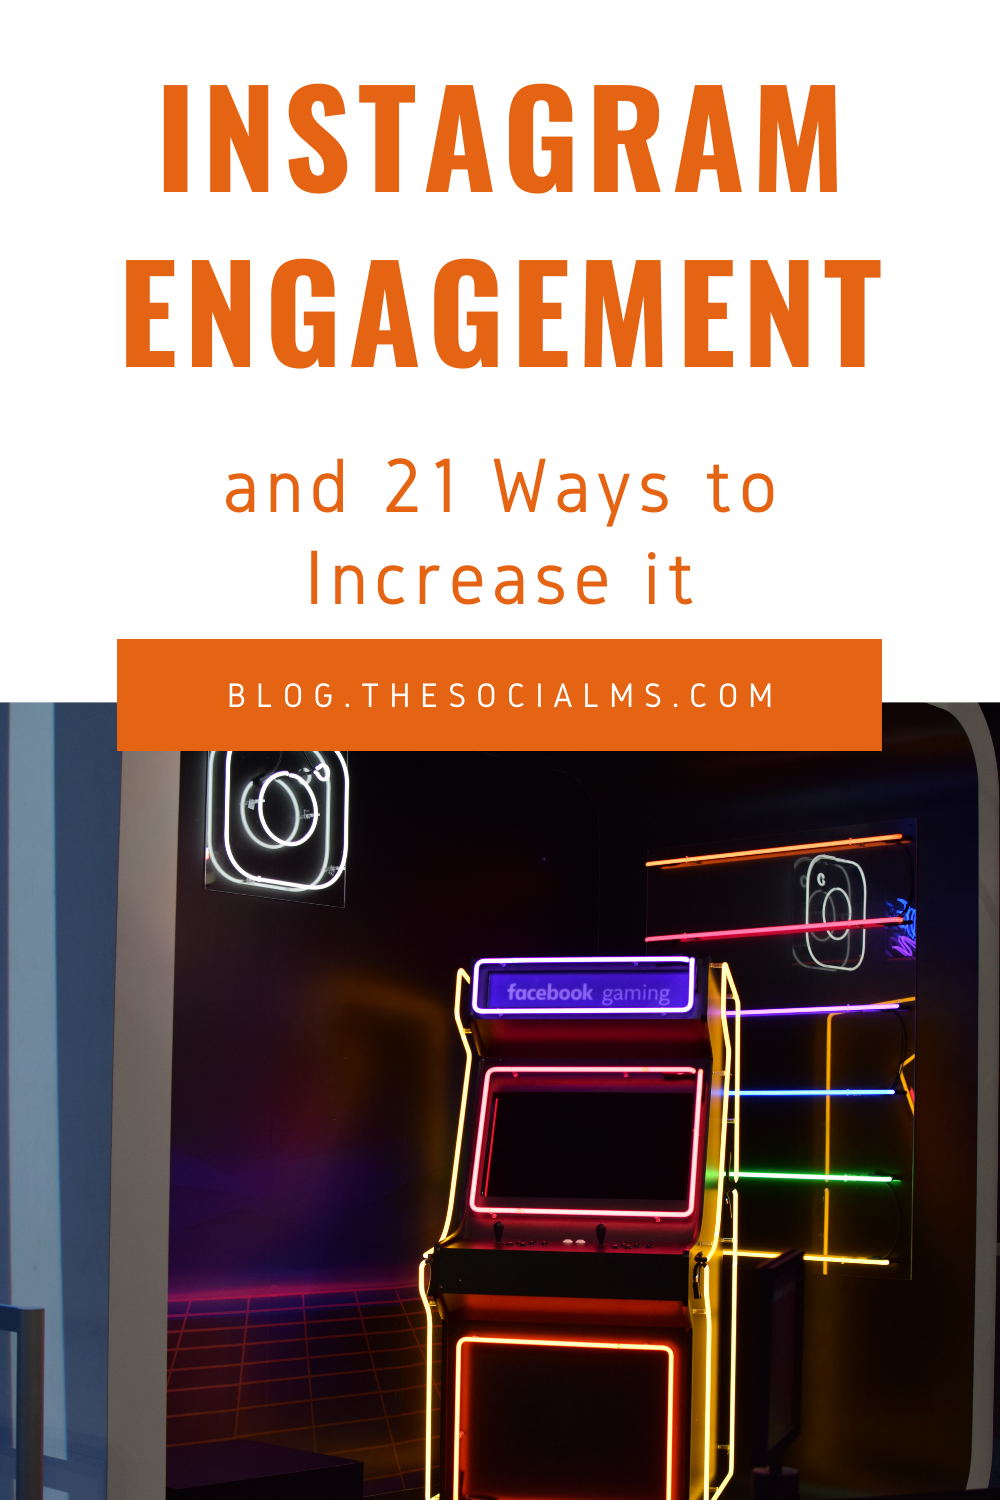 Like most social networks, Instagram uses an algorithm to decide how much reach and visibility an Instagram post gets. One major factor that influences how your Instagram posts are ranked in the Instagram algorithm is the Instagram engagement that you achieve with your activity on Instagram. Here are 21 ideas to increase your instagram engagement. #instagram #instagramtips #instagramengagement #instagrammarketing #instagramsuccess